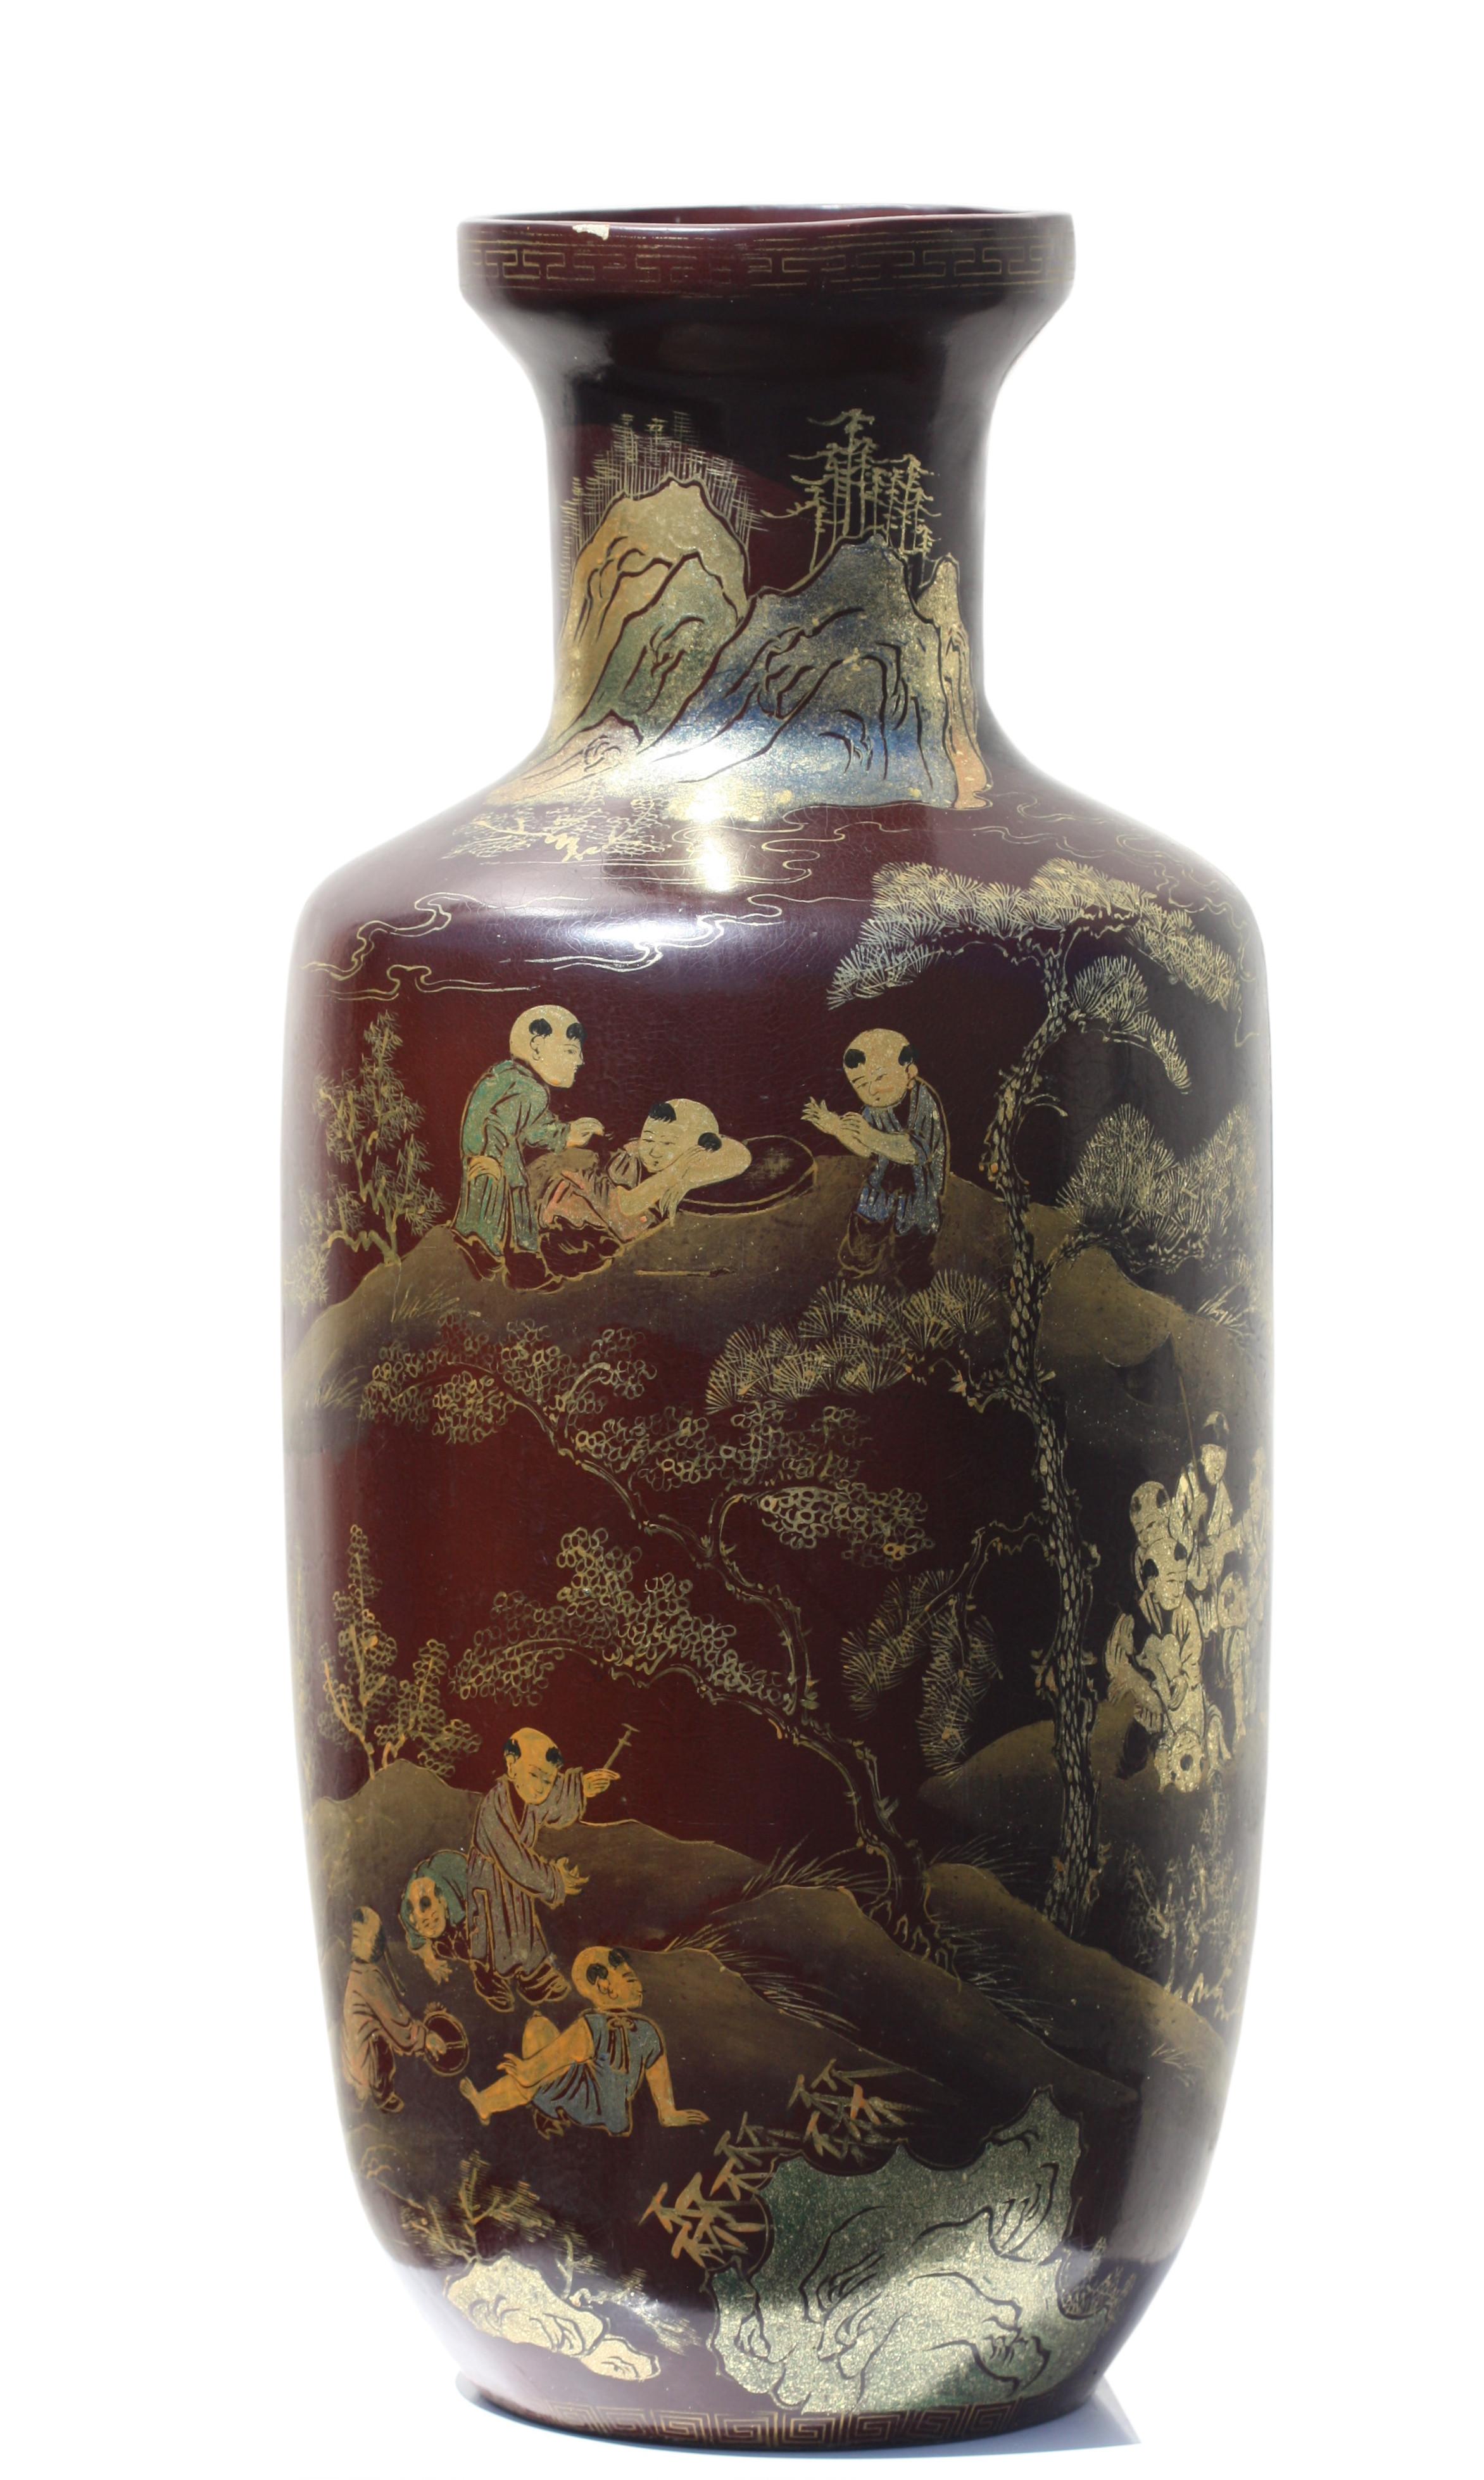 A pair of Chinese export vases of black lacquer with gold gilt decoration.
Decorated overall with chinese figures, trees and characters. 
Measures: height 23 in. (58.42 cm.) 
diameter 10 in. (25.4 cm.) 
Property of a private California